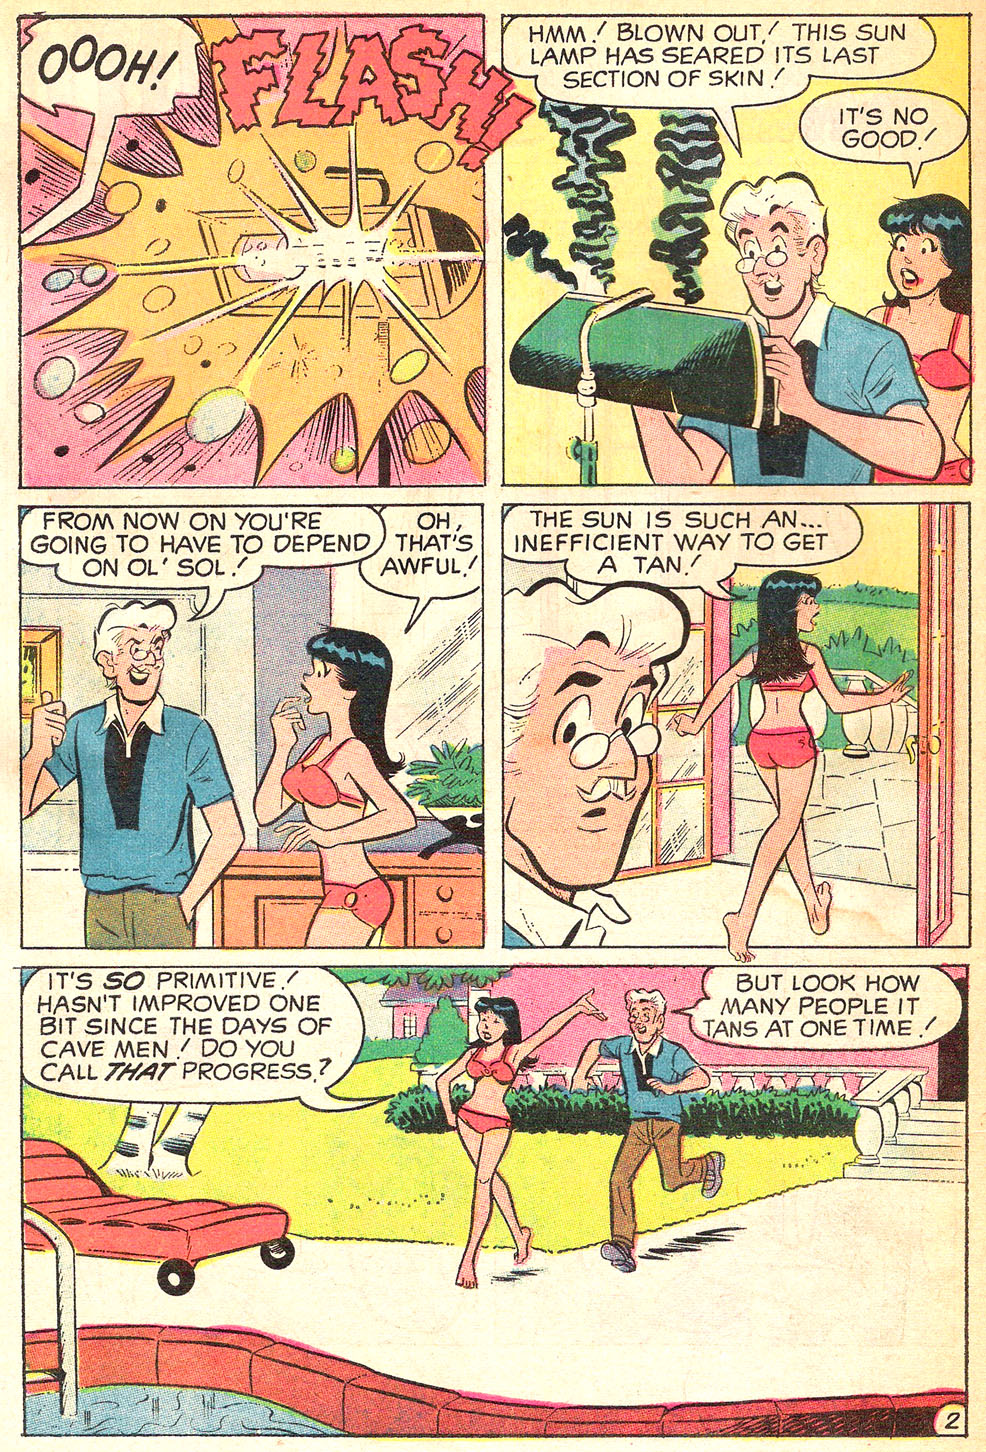 Read online Archie's Girls Betty and Veronica comic -  Issue #177 - 30